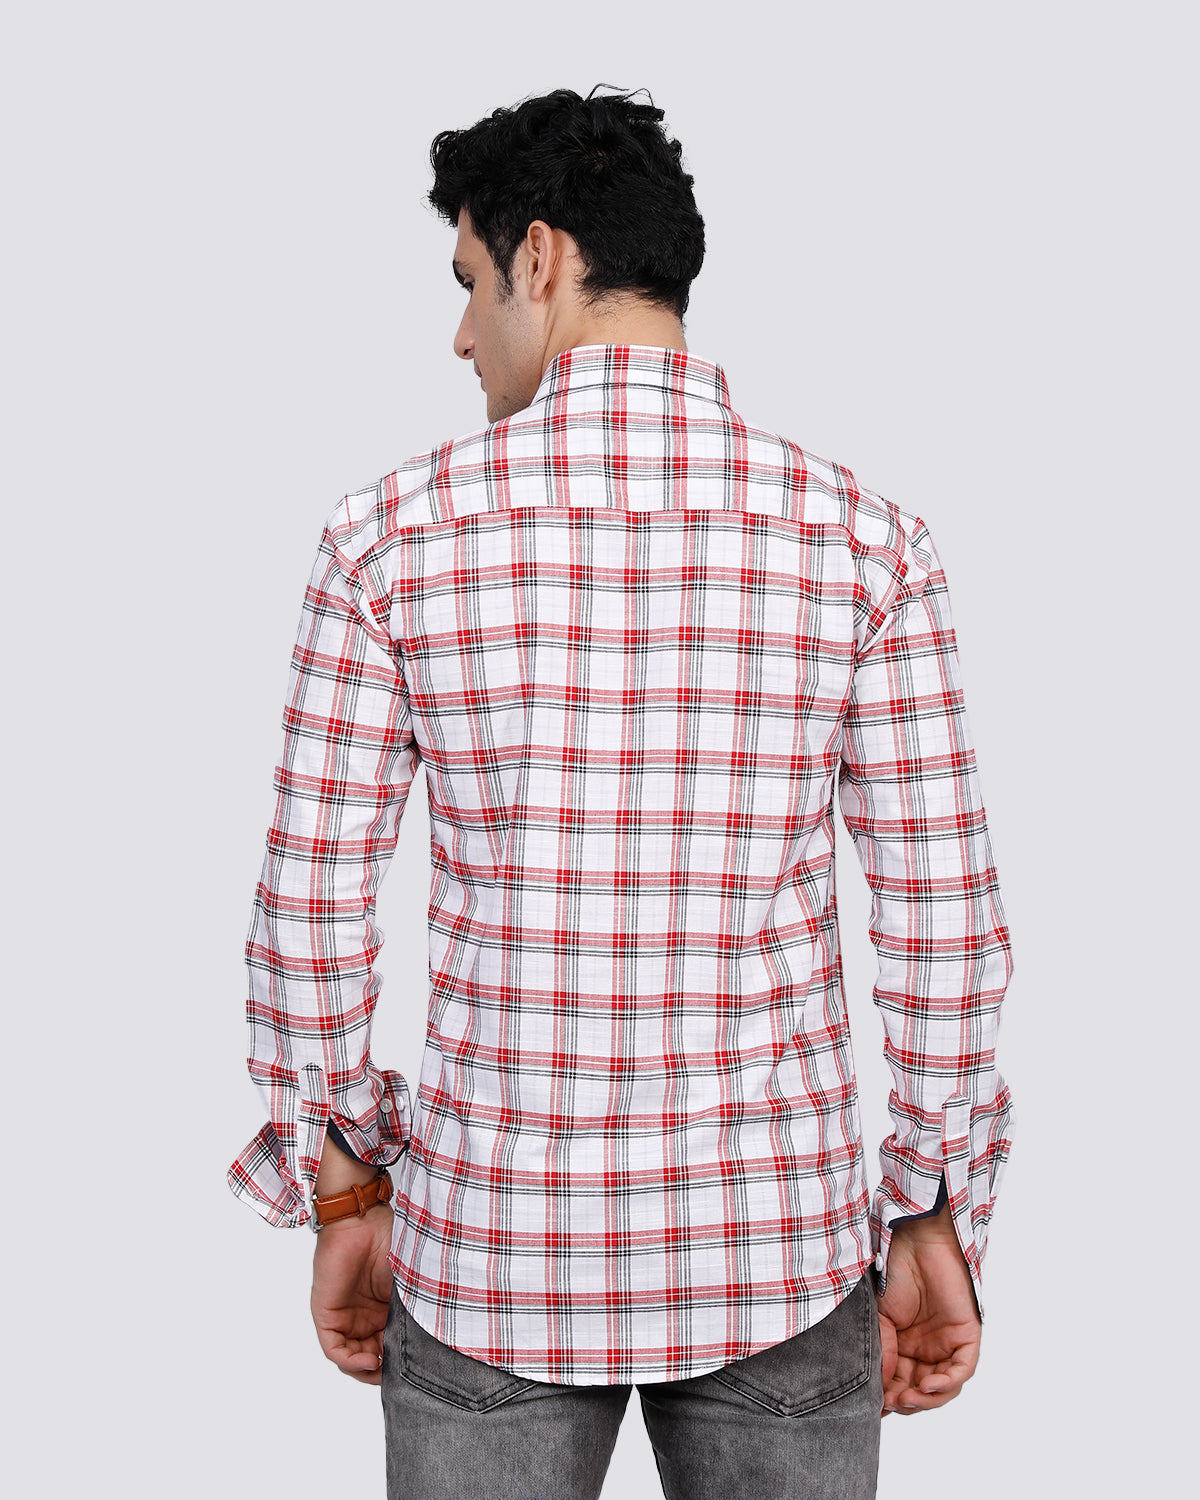 Men Regular Fit Checked Casual Shirt - Lt. Red